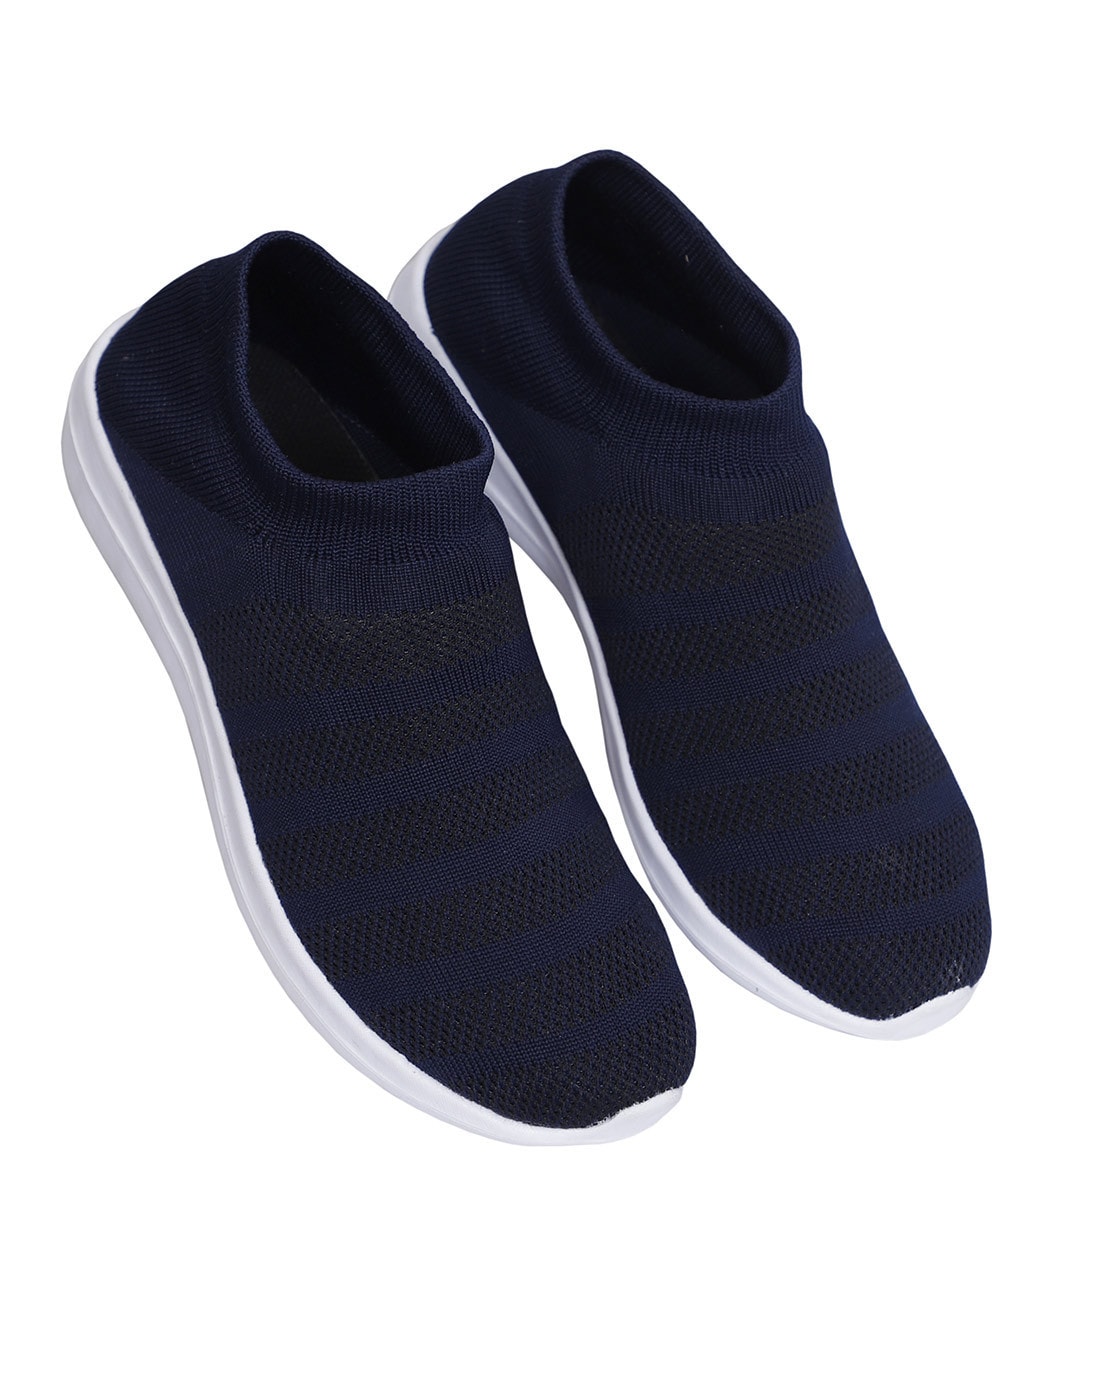 Buy Blue Sports Shoes for Men by SUKUN 